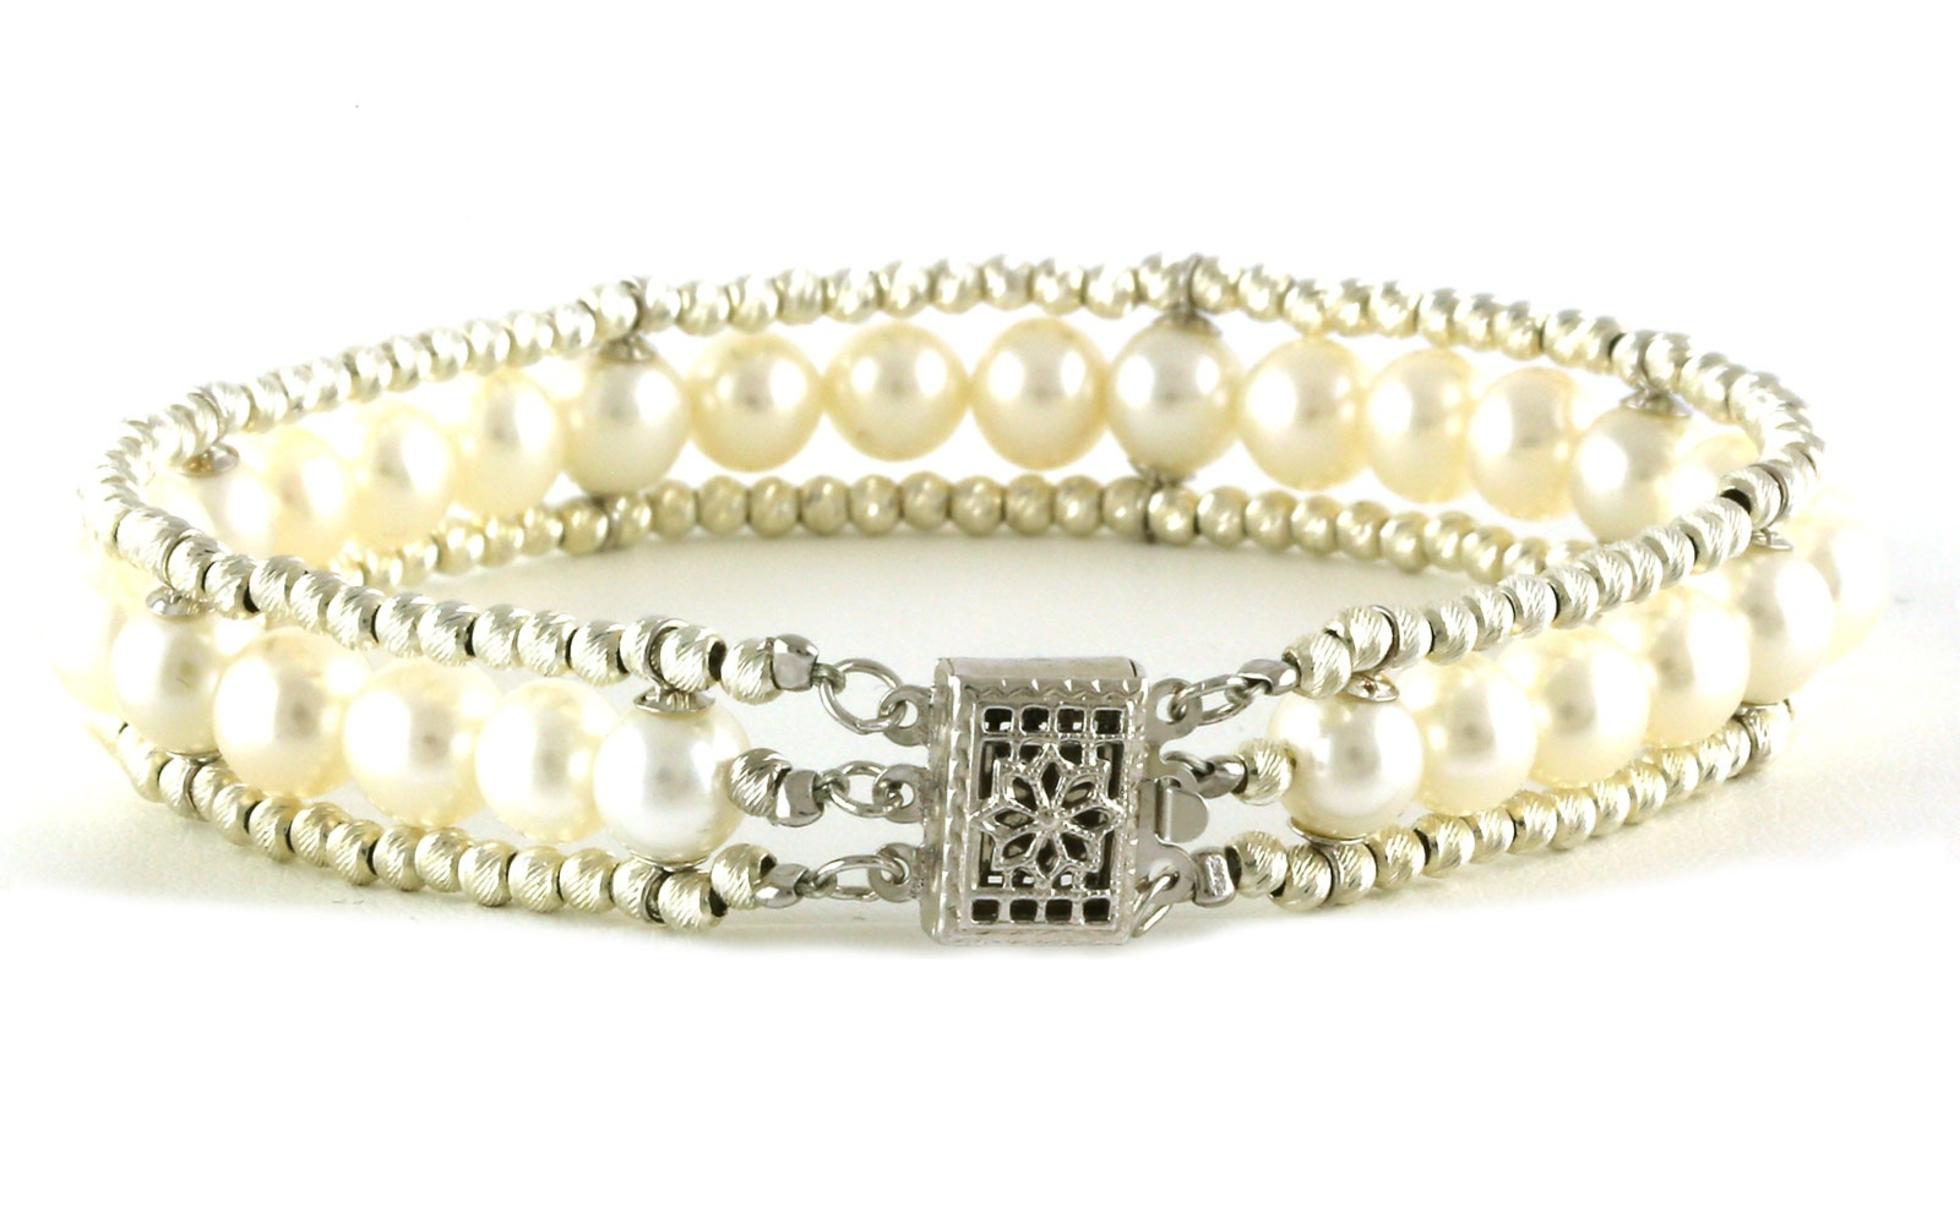 Triple Row Sparkle Bead and Pearl Bracelet in Sterling Silver 